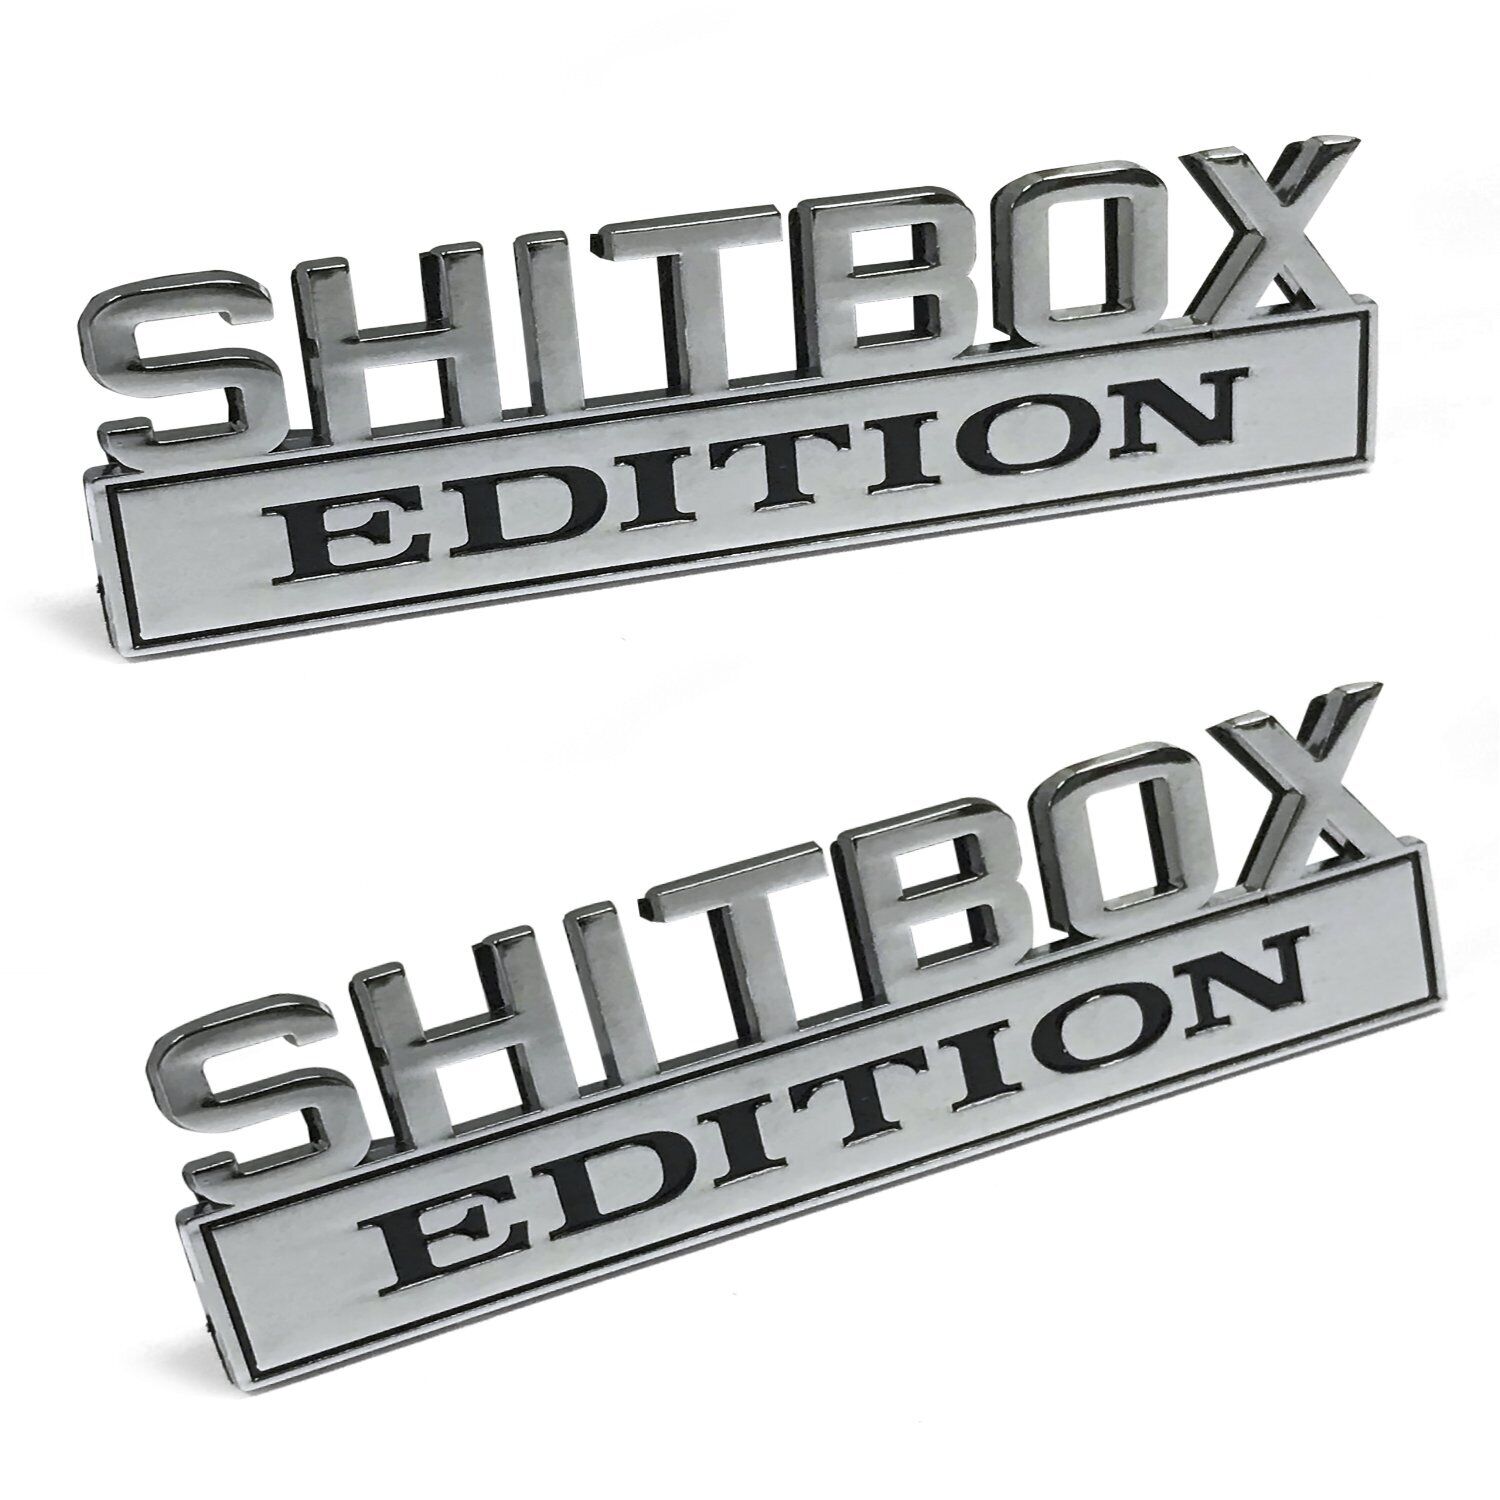 SHITBOX EDITION PAIR CAR EMBLEMS Chrome Metal Badges suit CHEVY or F-150 NEW